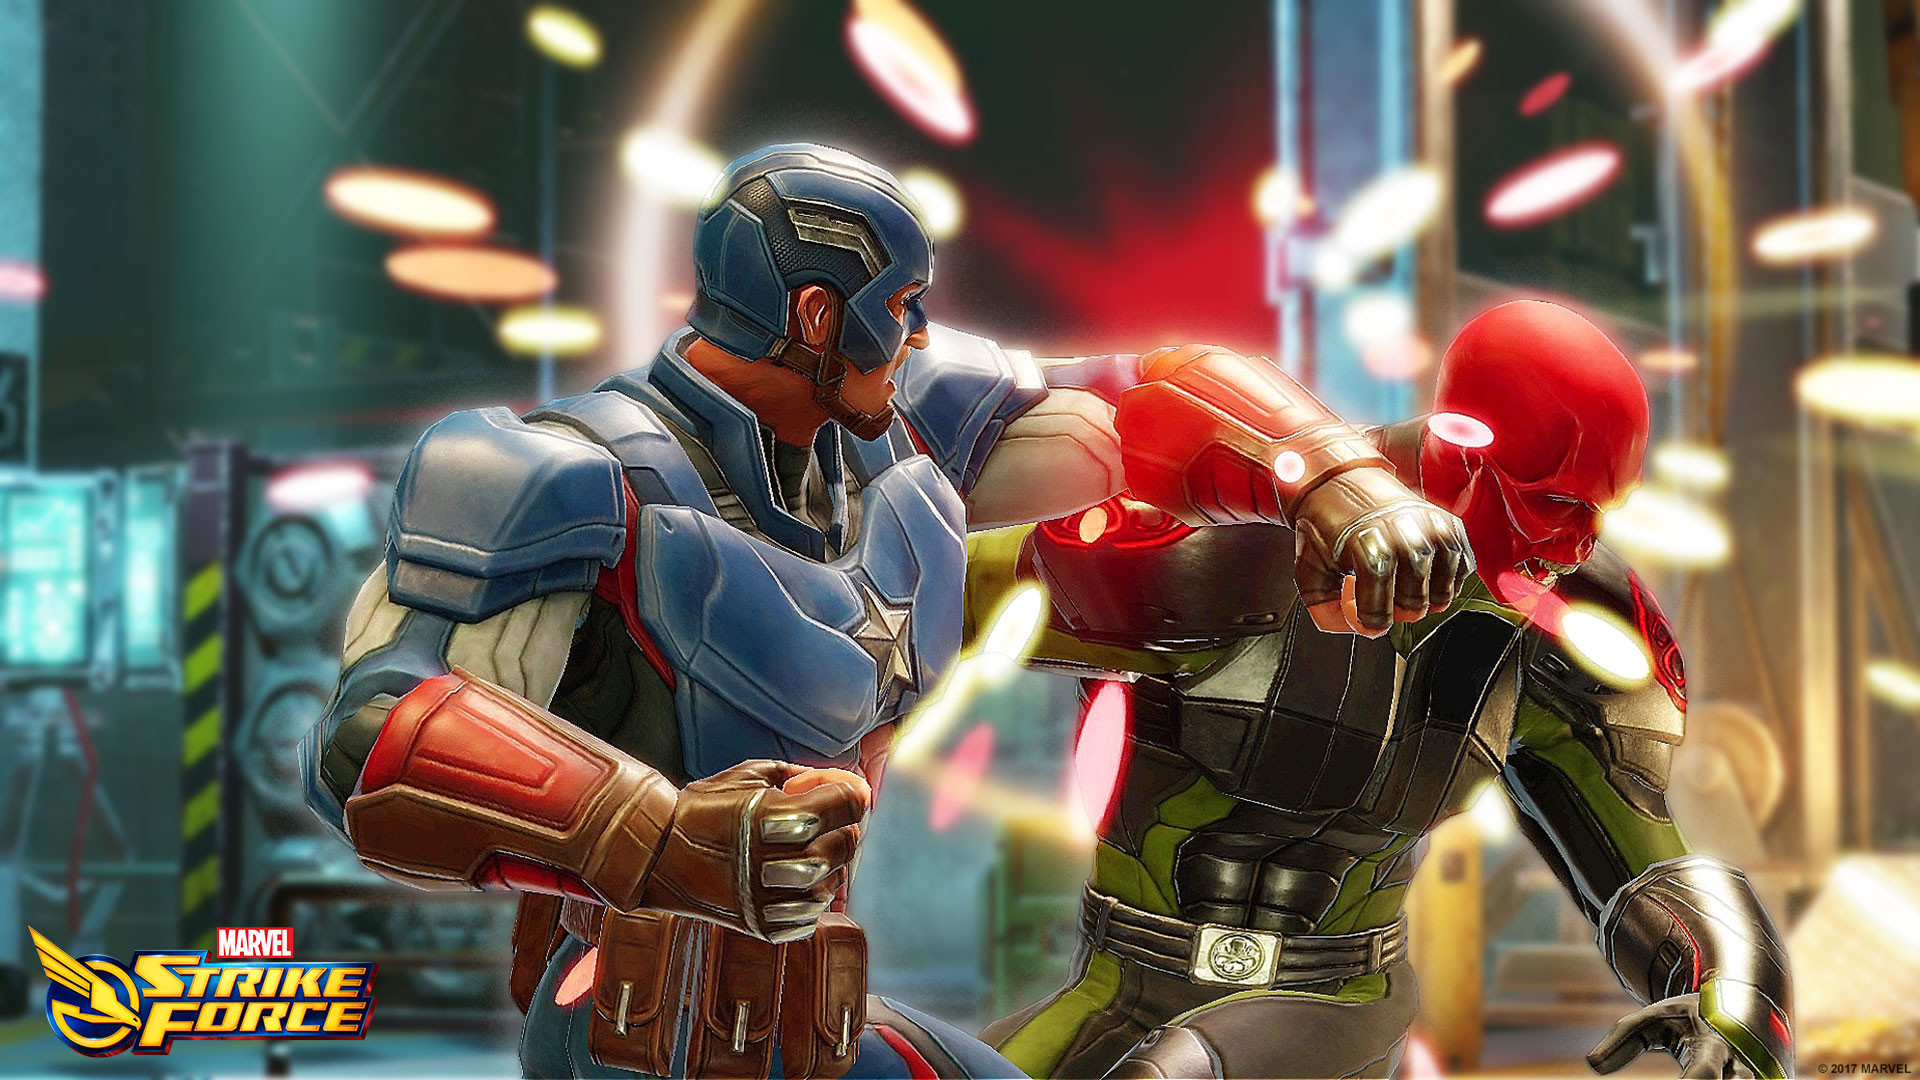 1920x1080 Marvel Strike Force's microtransactions go beyond the mobile standard